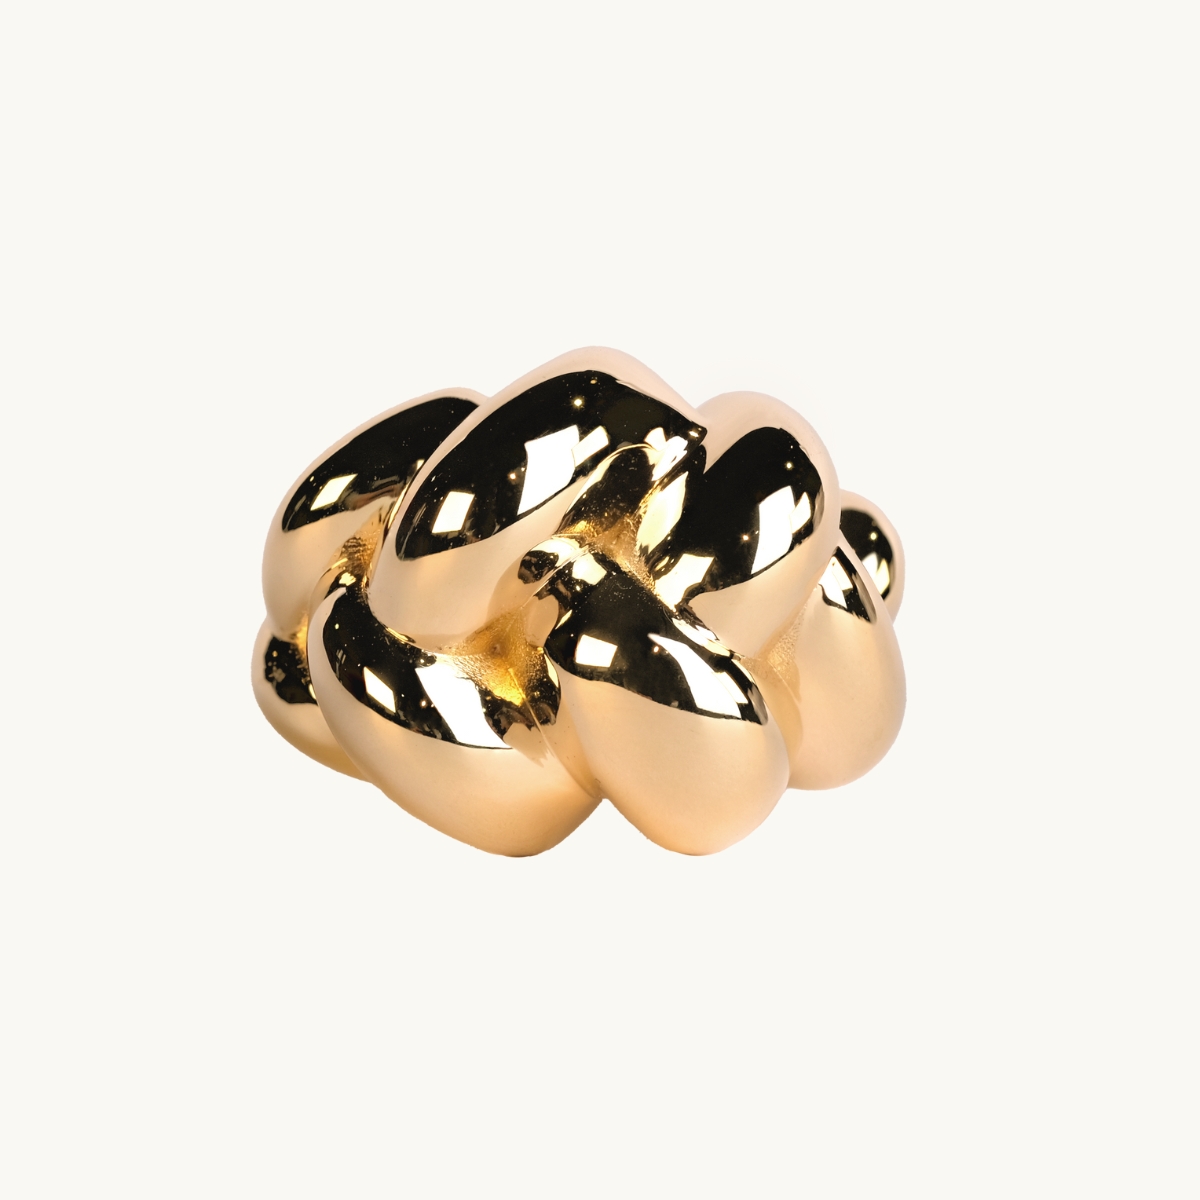 A braided ring in gold plated brass.